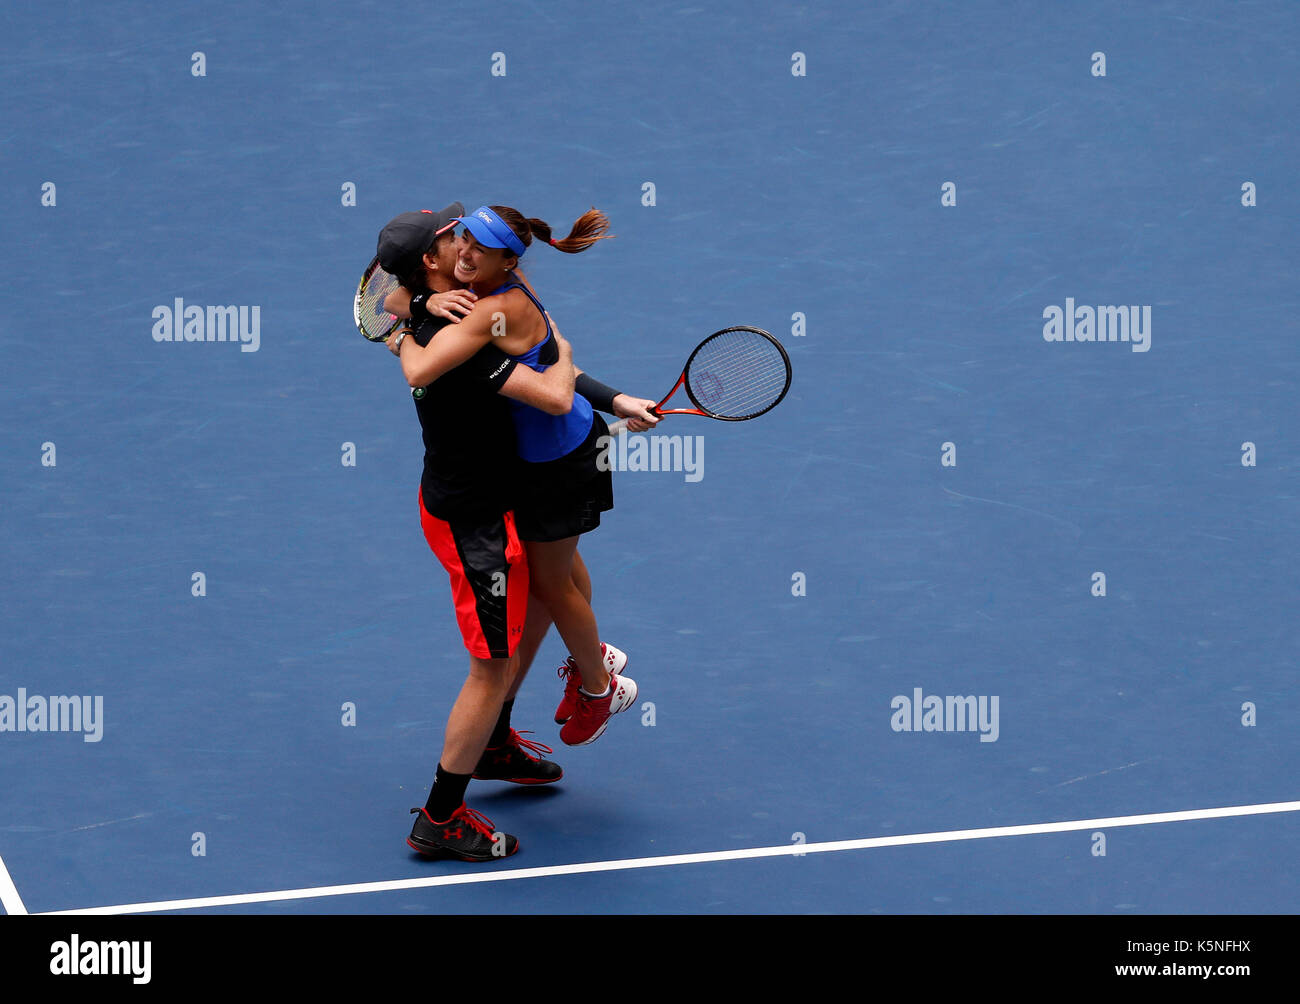 New York, USA. 9th Sep, 2017. Martina Hingis (R) of Switzerland and Jamie Murray of Great Britain celebrate after defeating Hao-Ching Chan of Chinese Taipei and Michael Venus of New Zealand during the mixed doubles final match at the 2017 US Open in New York, the United States, Sept. 9, 2017. Martina Hingis and Jamie Murray won 2-1 to claim the title. Credit: Qin Lang/Xinhua/Alamy Live News Stock Photo